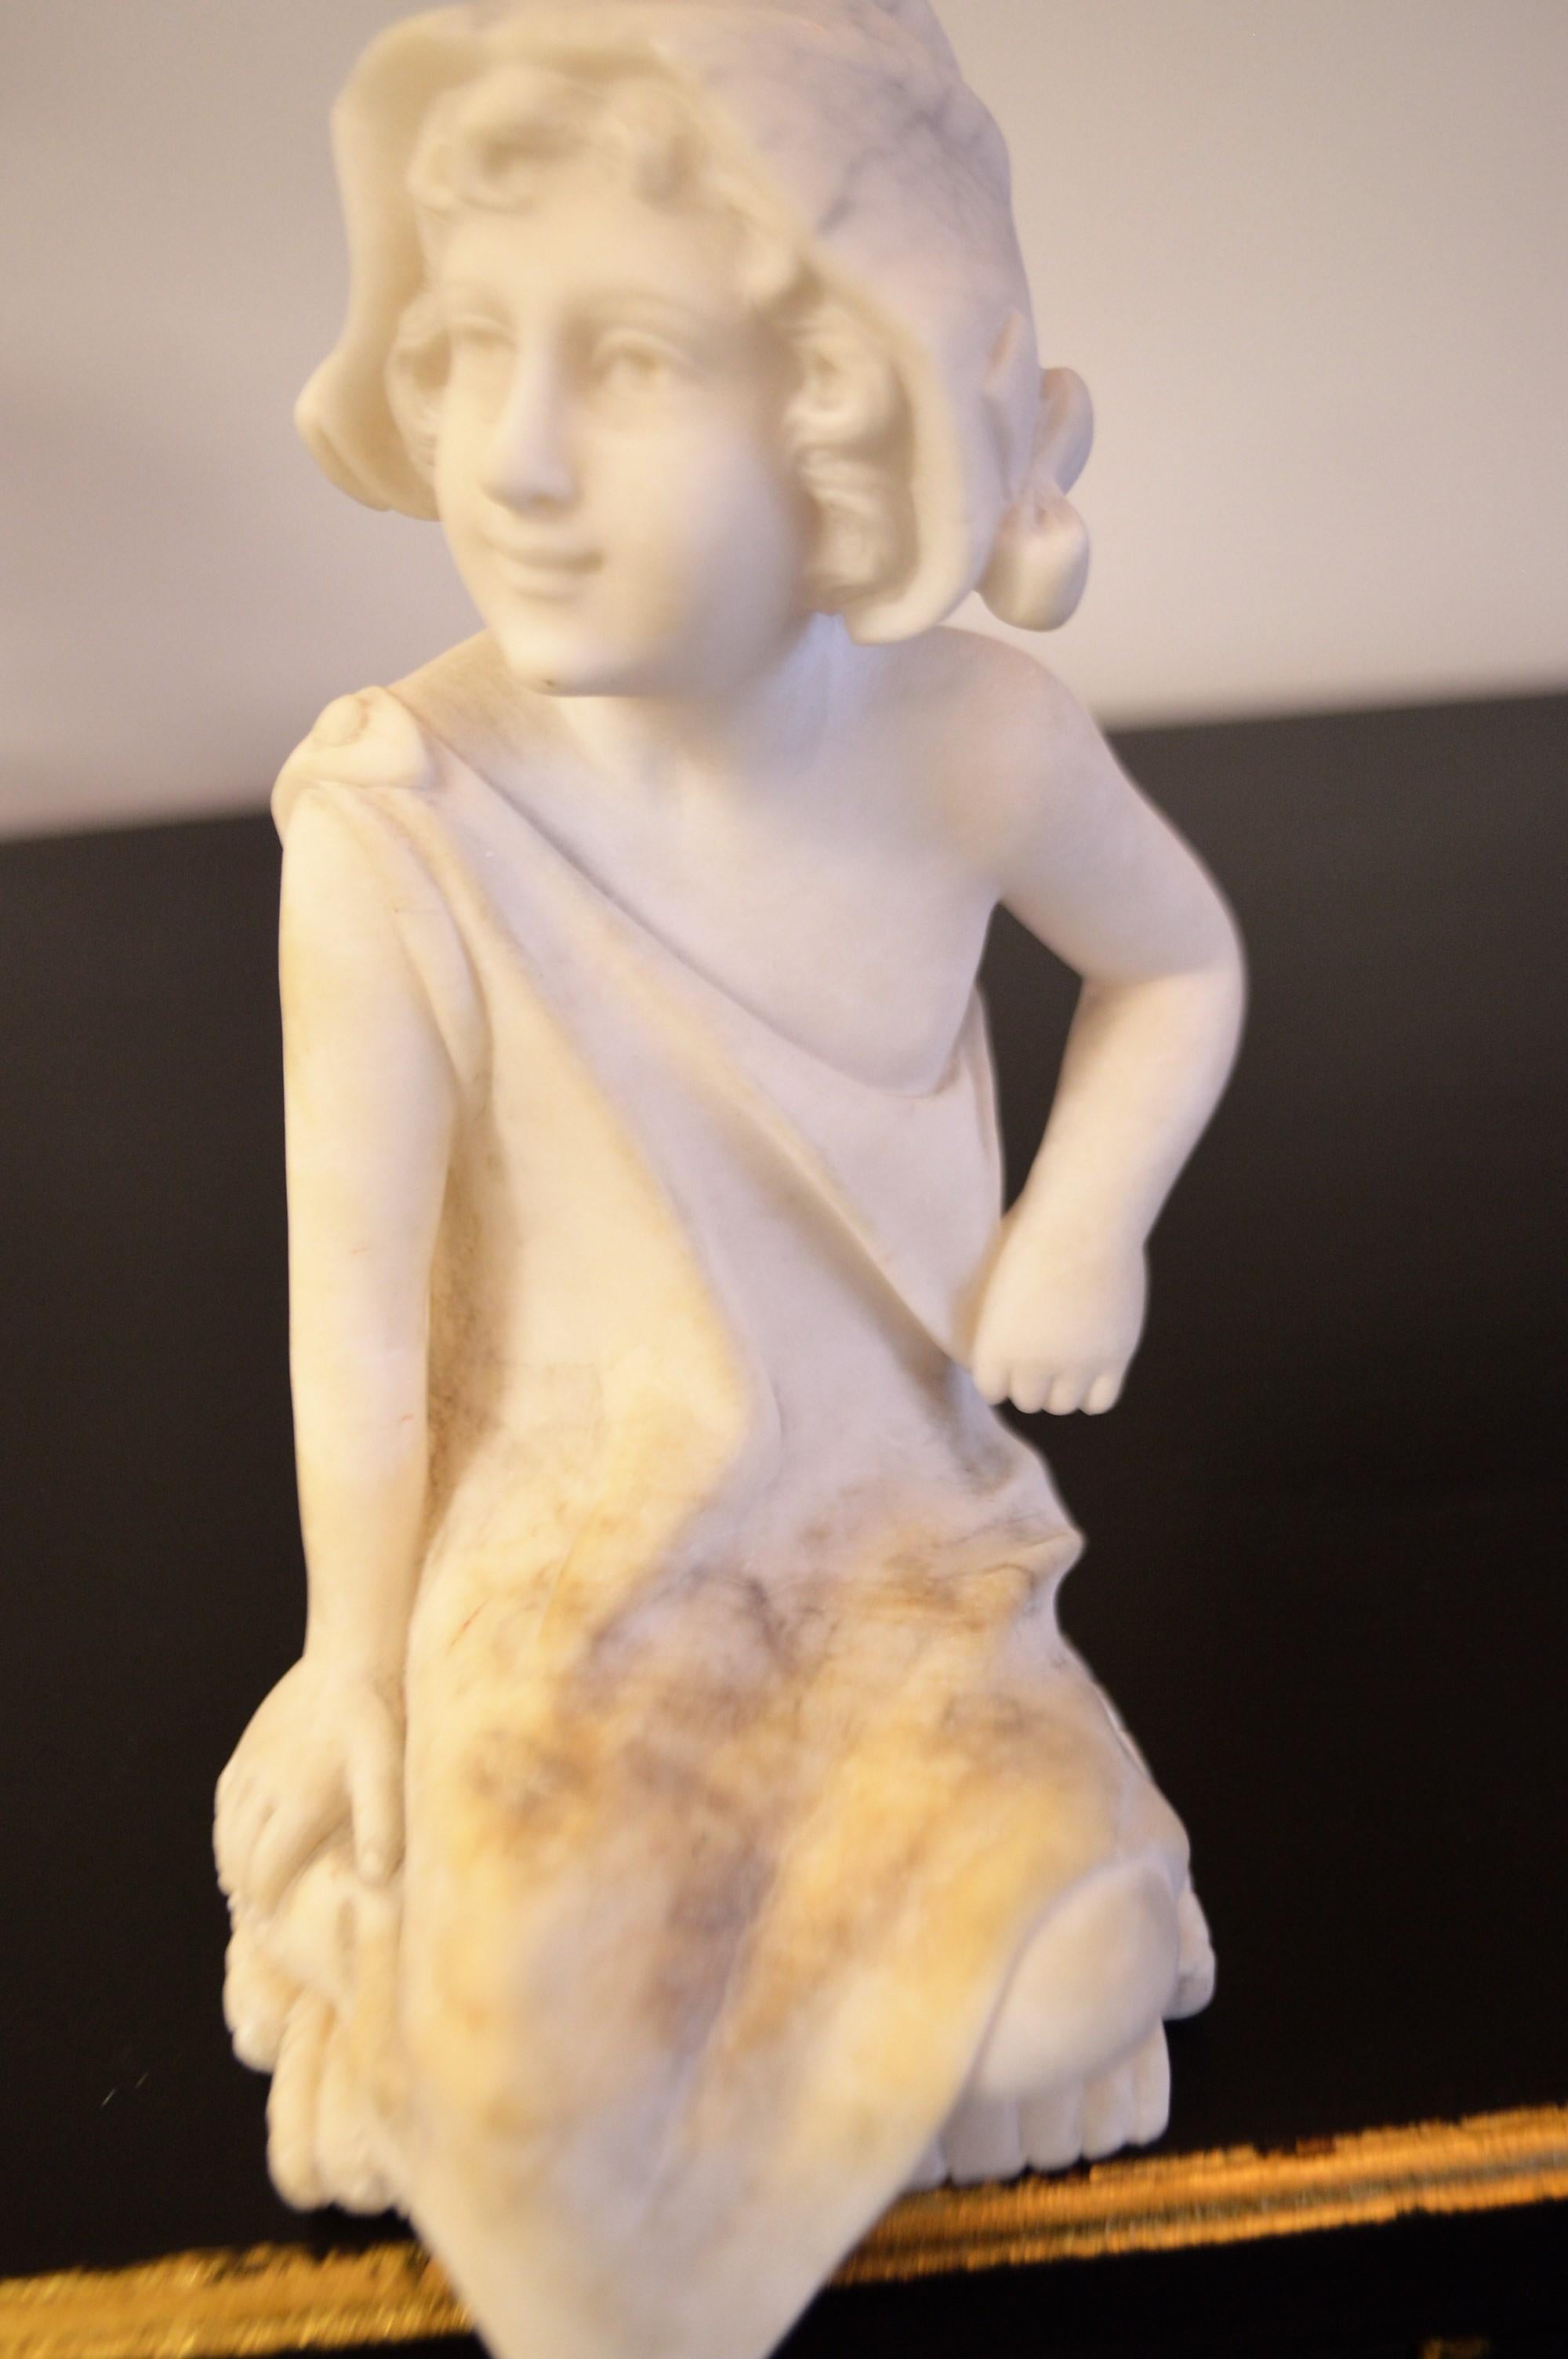 Unusual small charming marble of a pretty young girl wearing a hat and in a sitting position. The marble piece is made to sit on an edge wherever your imagination takes you.
The marble is a creamy white shows some age and is in 
excellent